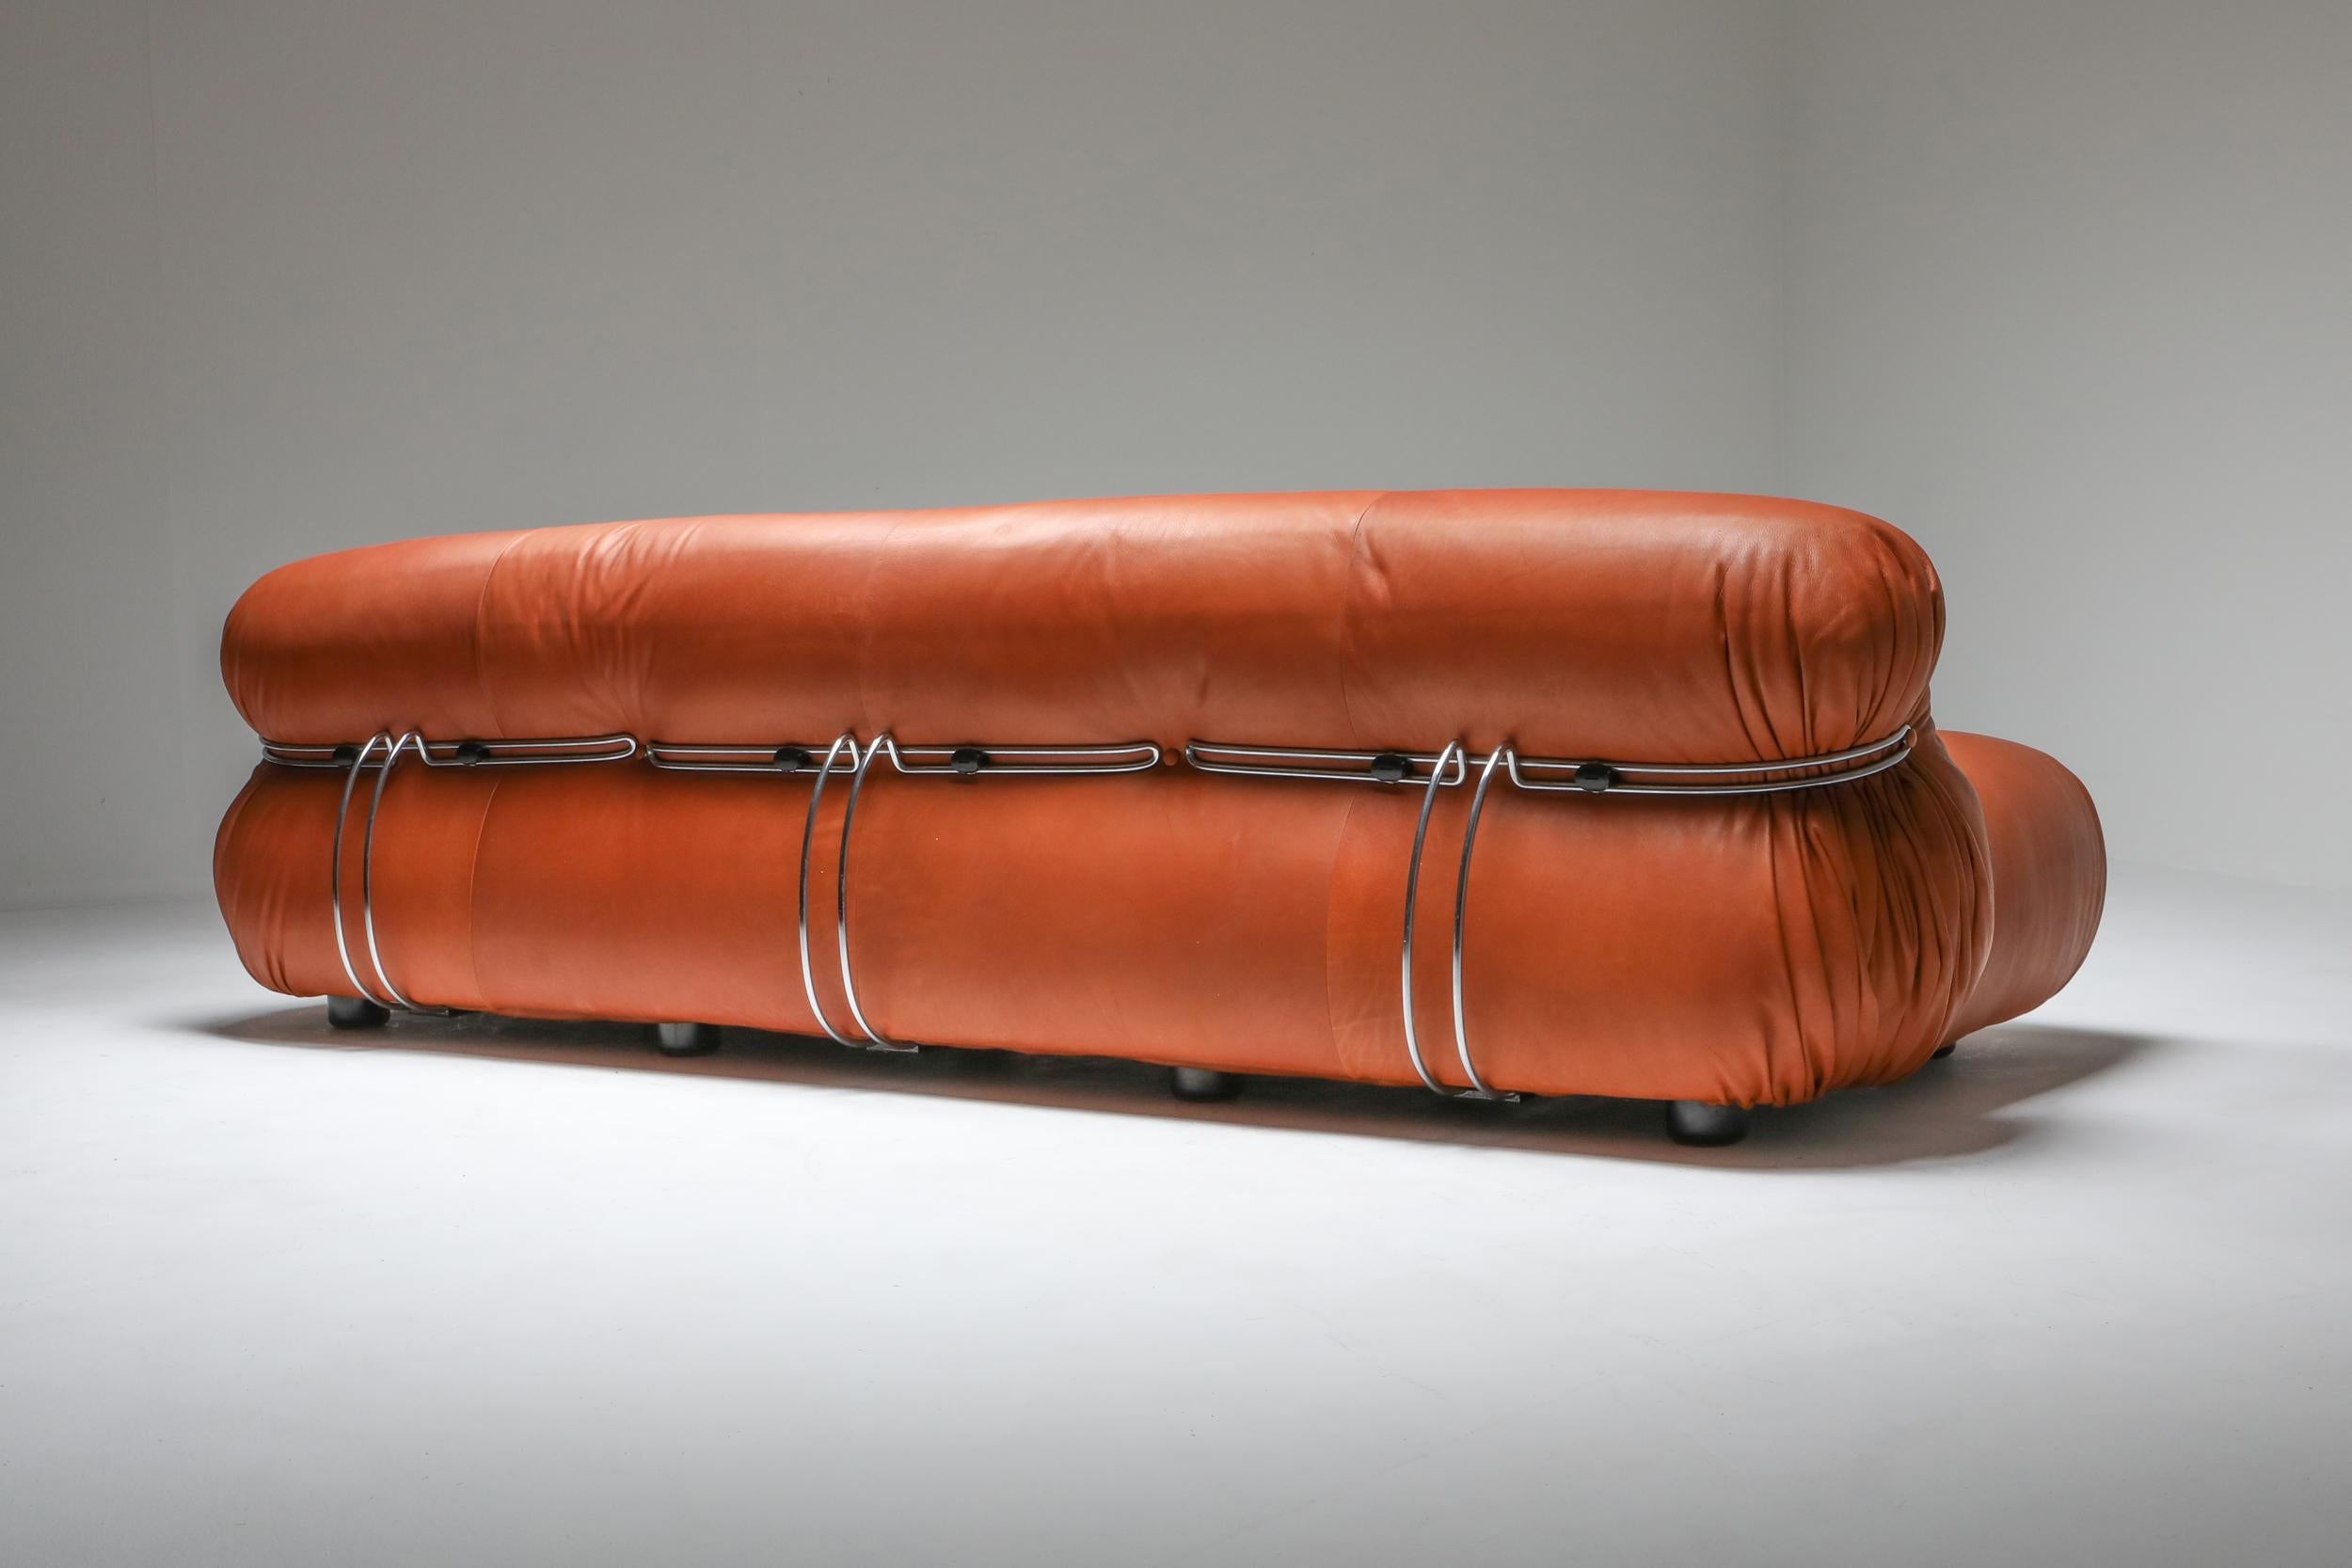 Scarpa; Cassina; Tobia Scarpa; Afra Scarpa; Minimalist; Italian design; Hollywood Regency; Post-modern;

Afra and Tobia Scarpa for Cassina, Soriana, reupholstered in aniline leather. Manufactured by Cassina in the 1970s, the Soriana collection was